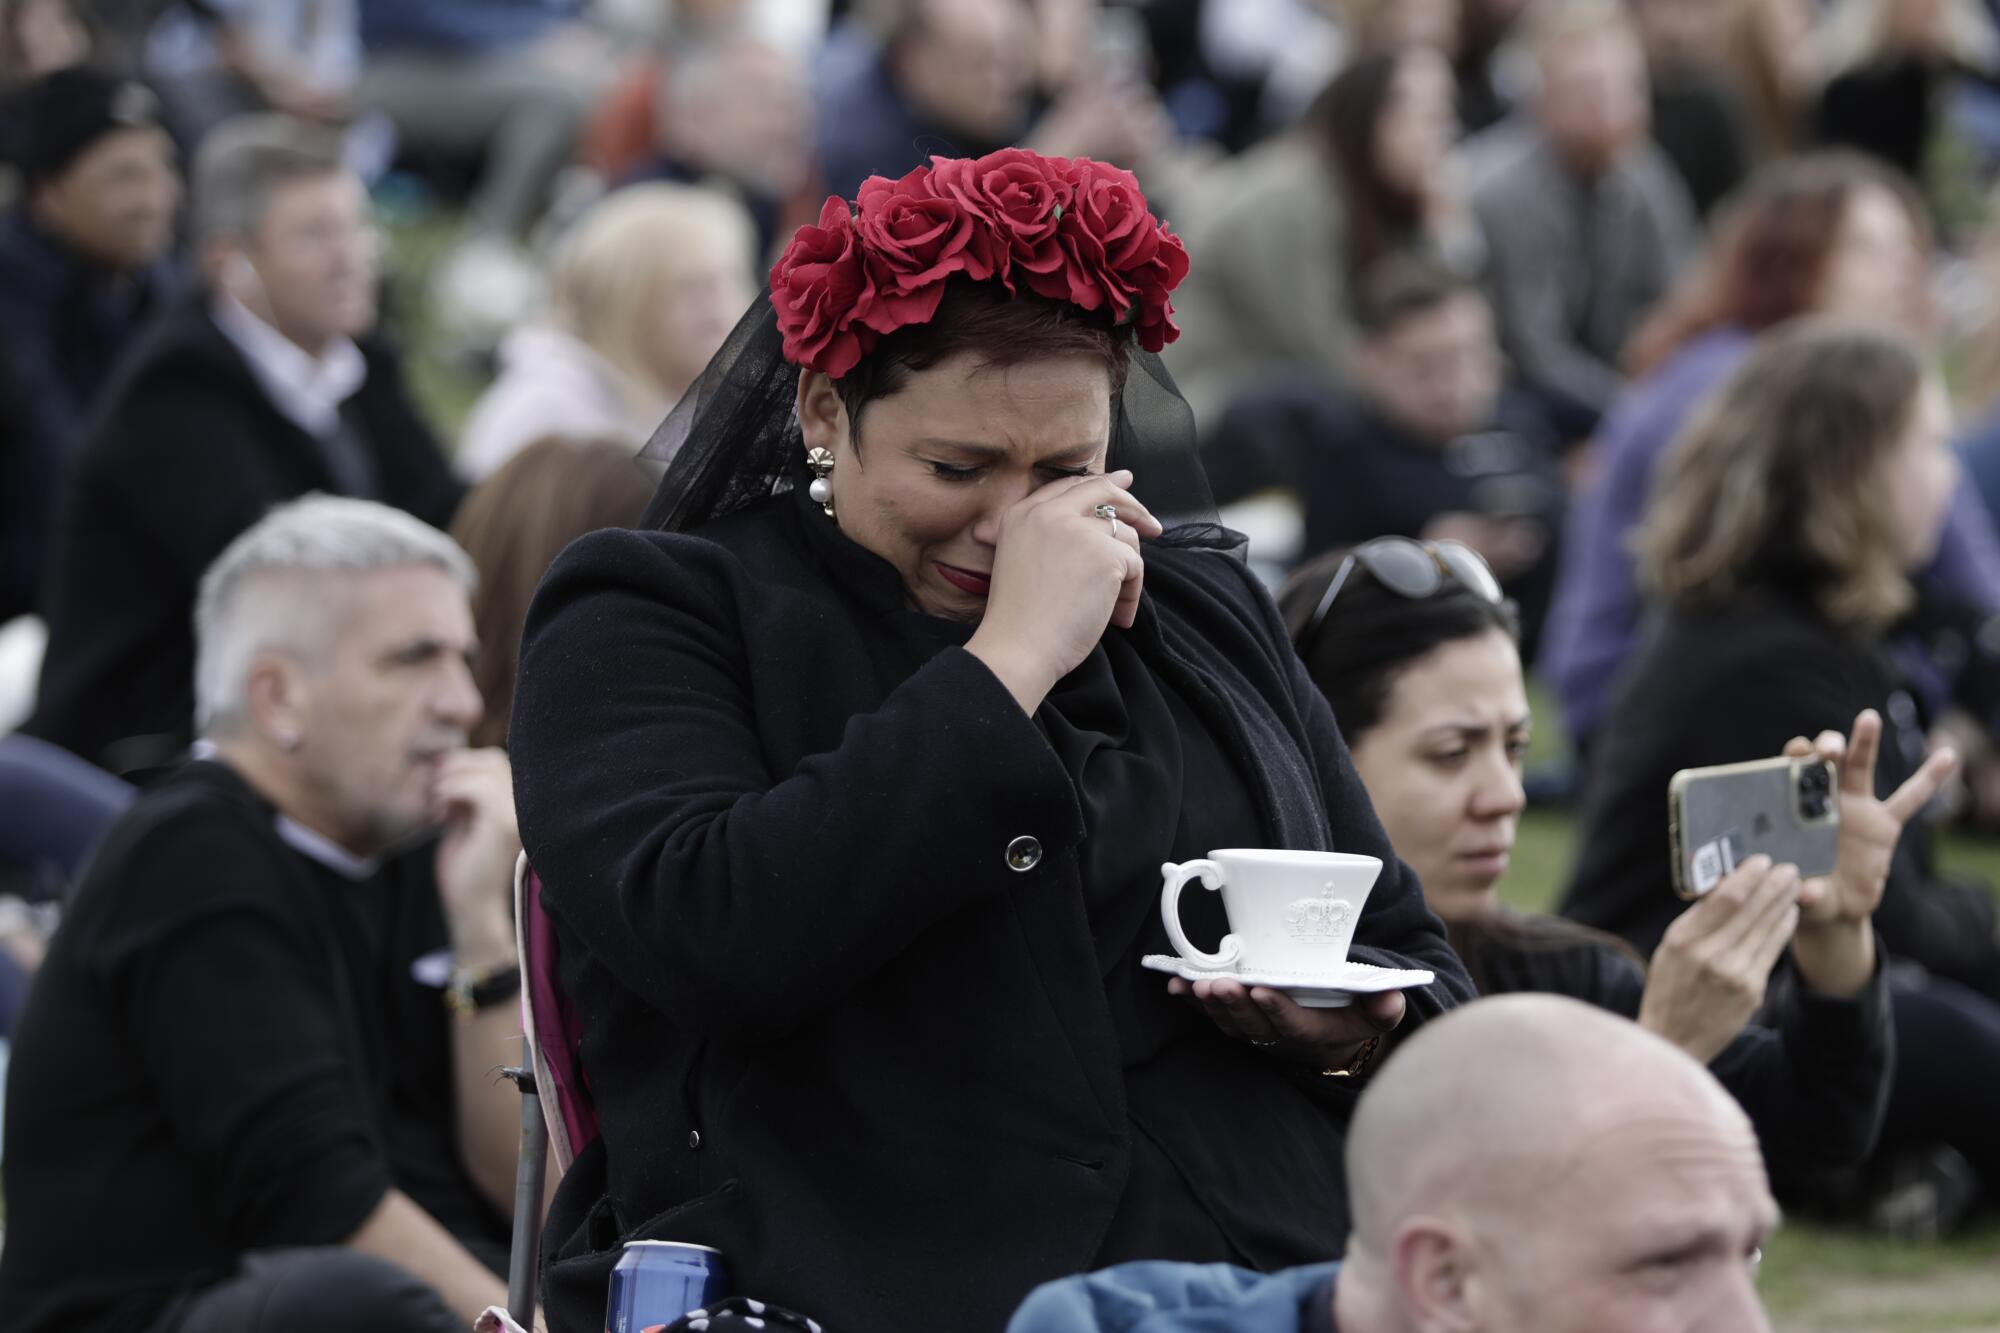 A woman in a crowded park holds a teacup and wipes her eyes.